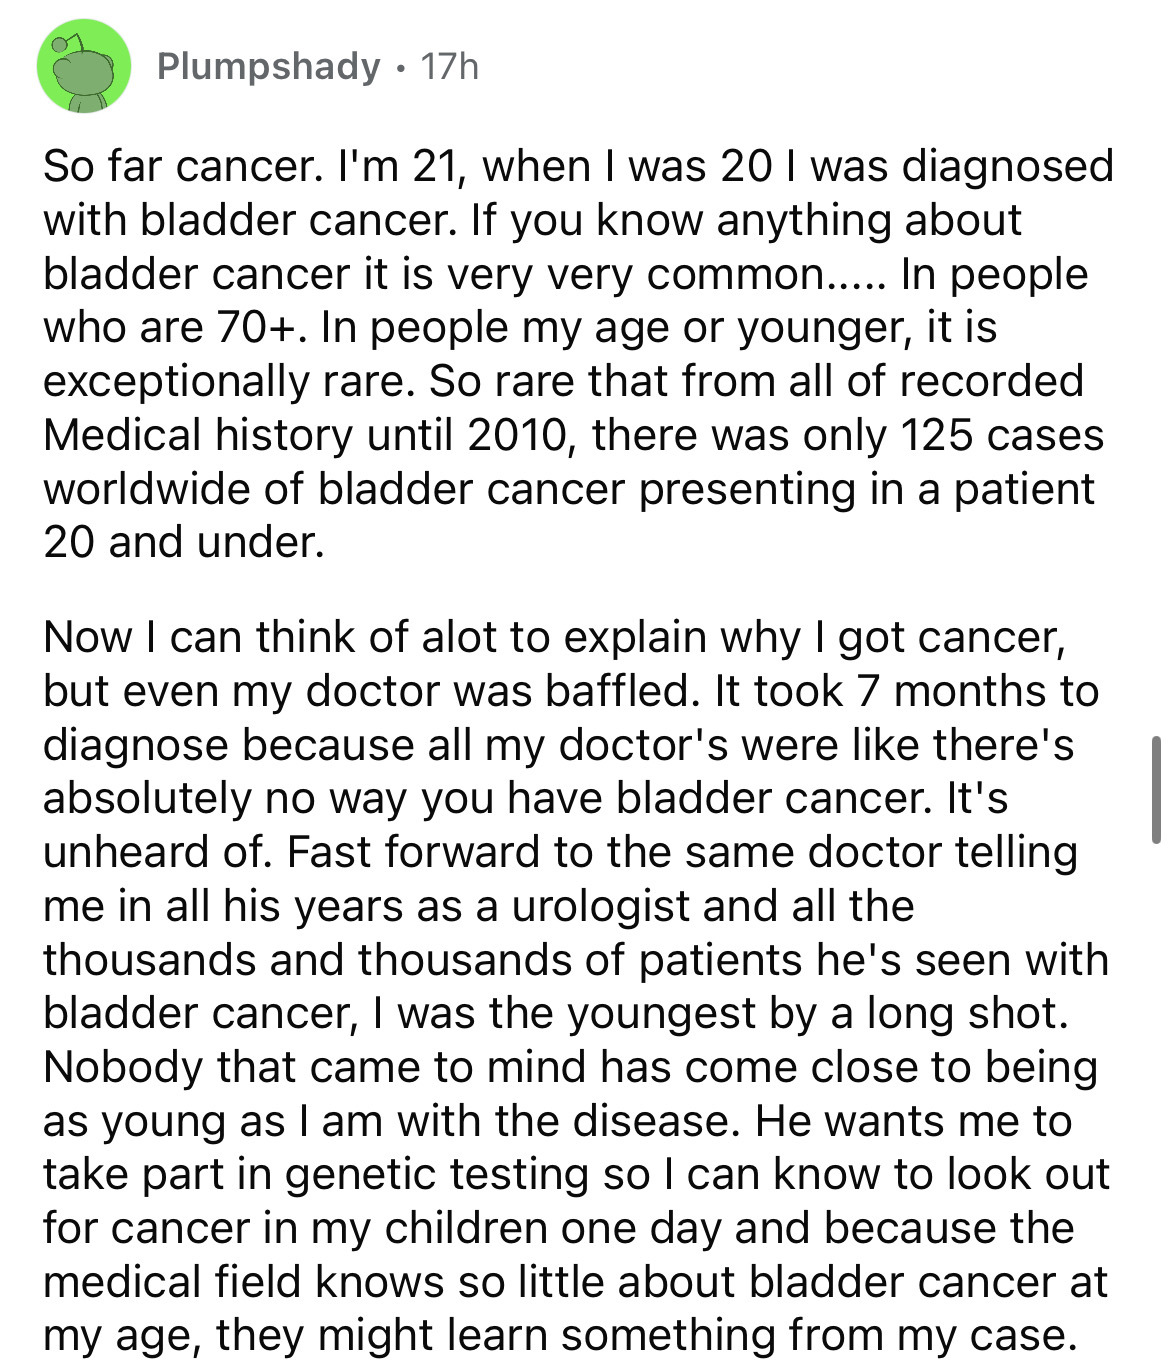 document - Plumpshady 17h So far cancer. I'm 21, when I was 20 I was diagnosed with bladder cancer. If you know anything about bladder cancer it is very very common..... In people who are 70. In people my age or younger, it is exceptionally rare. So rare 